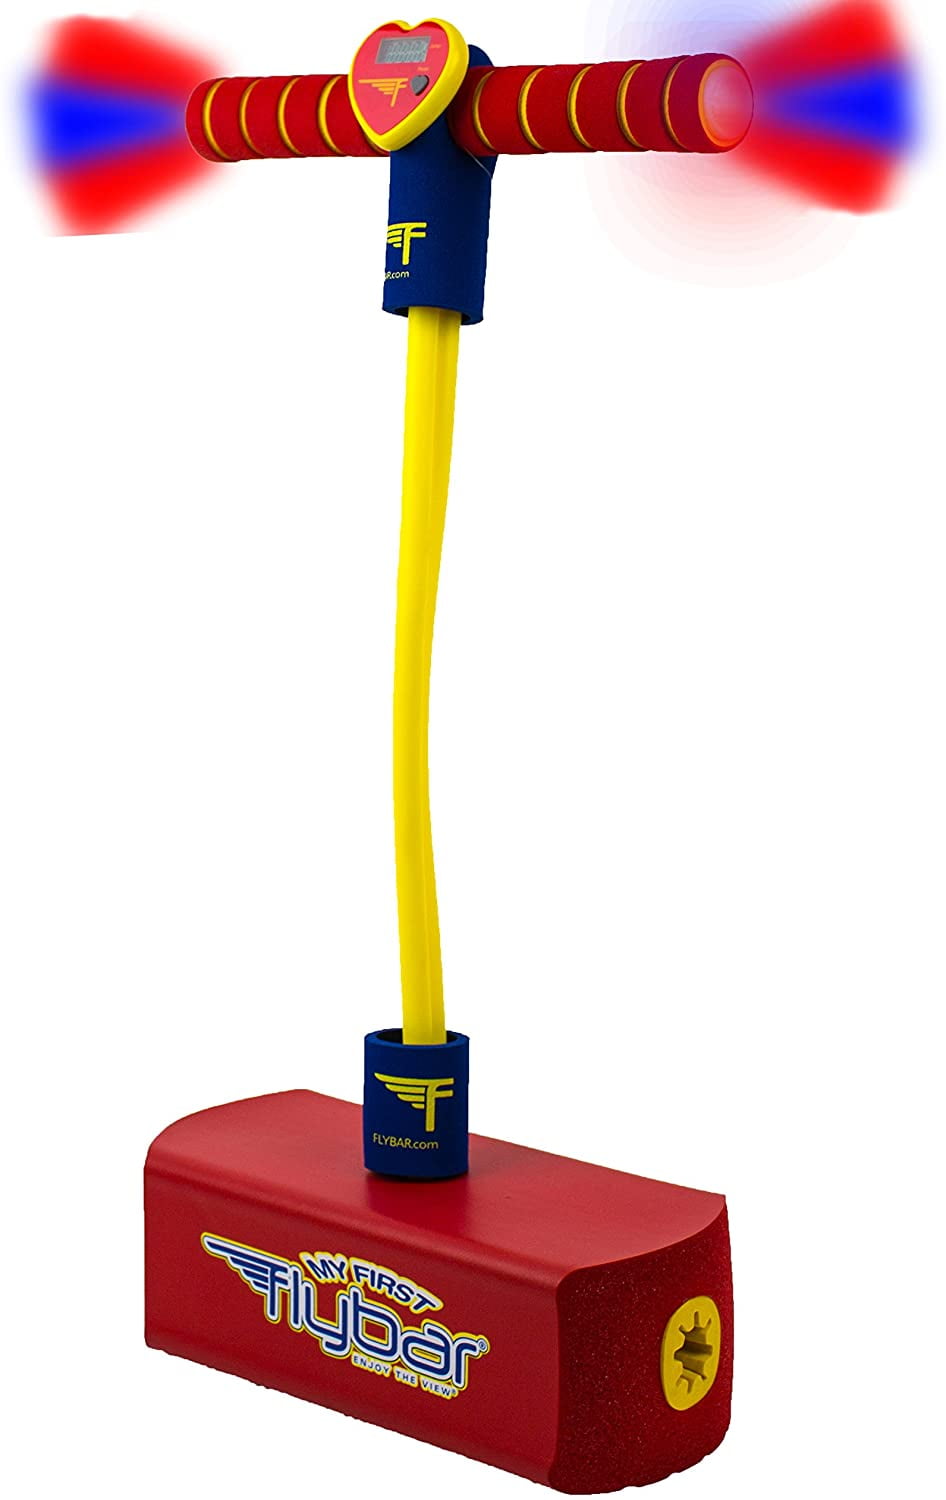 Kids Foam Pogo Jumper Outdoor Indoor Toy Supports up to 250 Pounds Ages 3 for sale online 